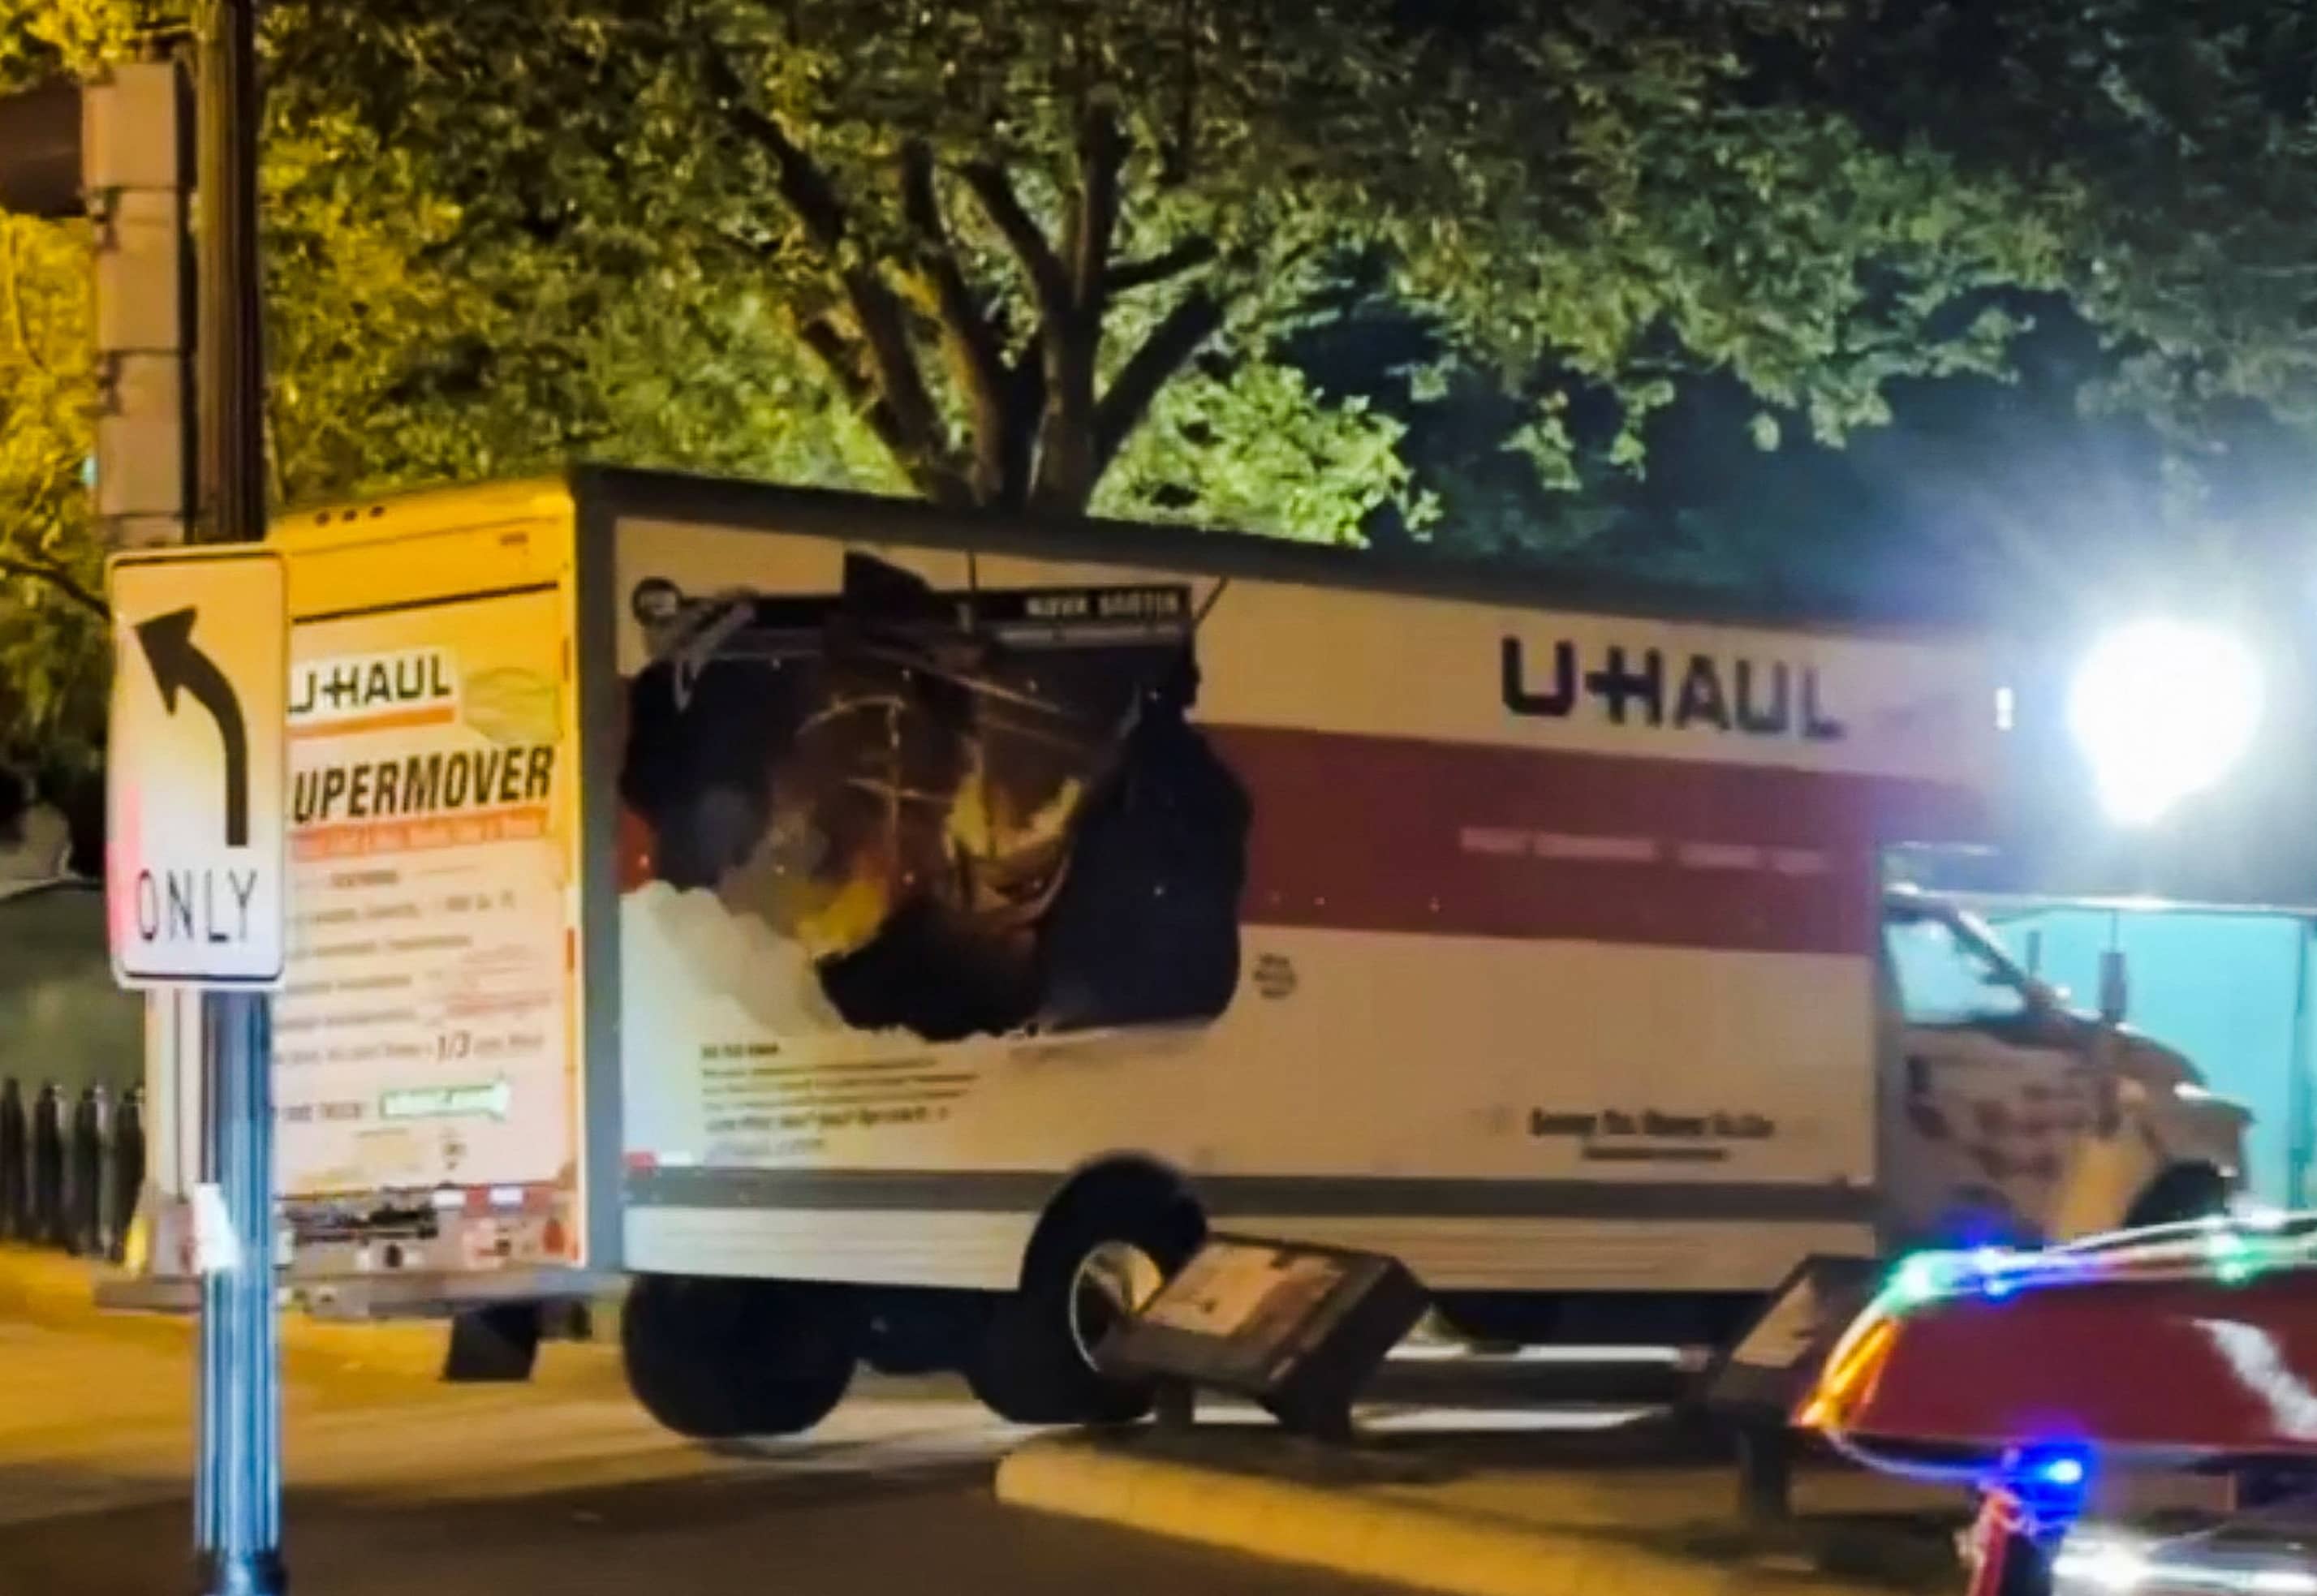 a-box-truck-crashes-into-security-barriers-on-lafayette-square-adjacent-to-the-white-house-grounds-in-washington